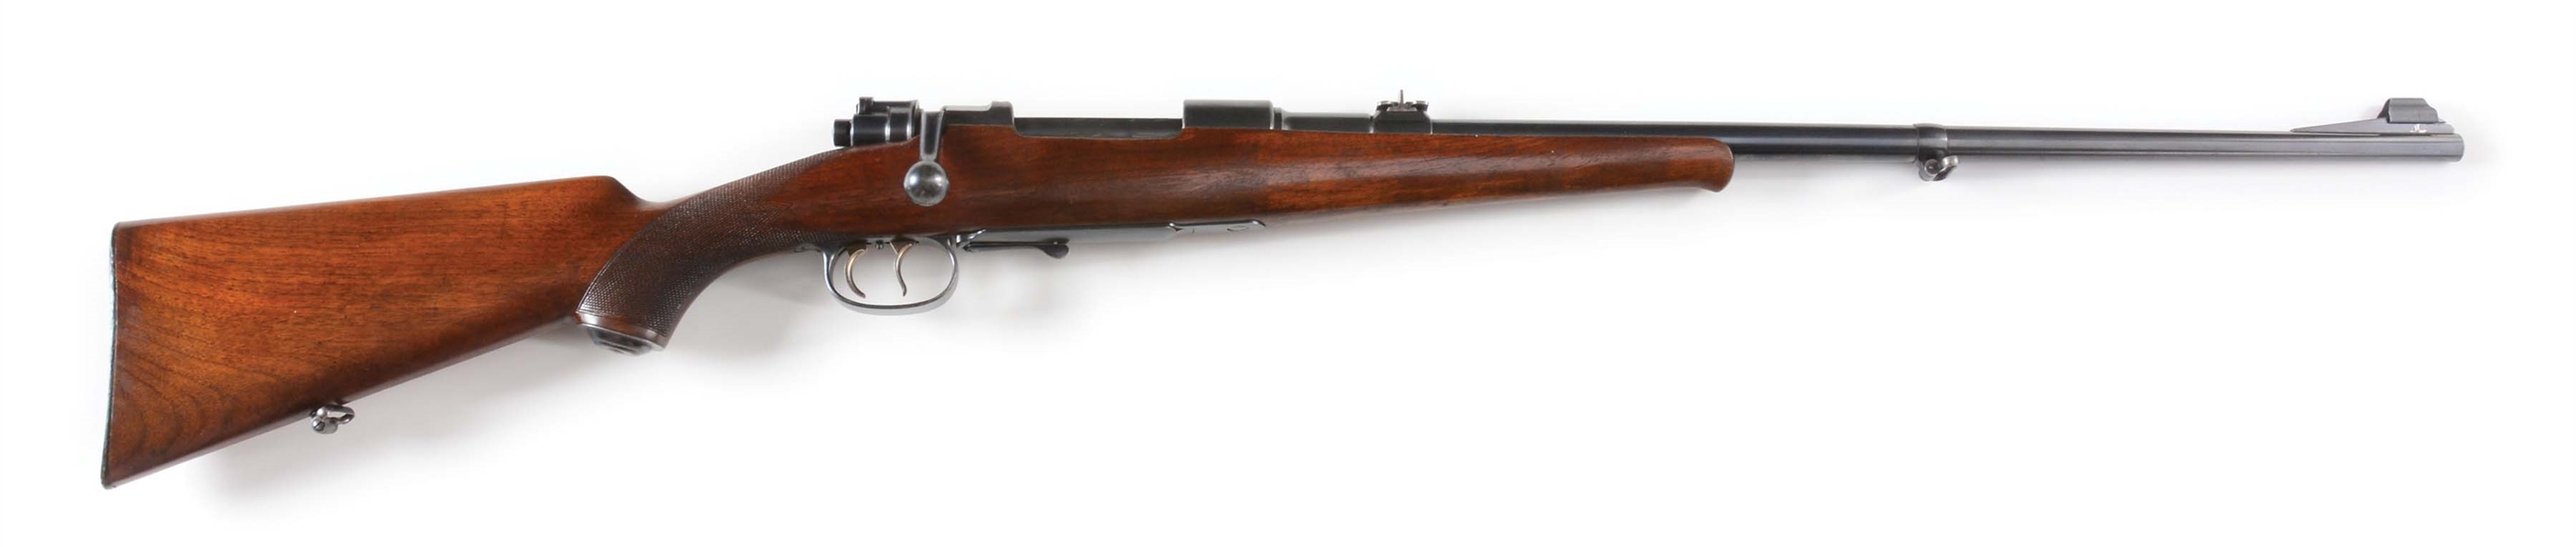 (C) FACTORY COMMERCIAL PRE-WAR MAUSER BOLT ACTION SPORTING RIFLE.